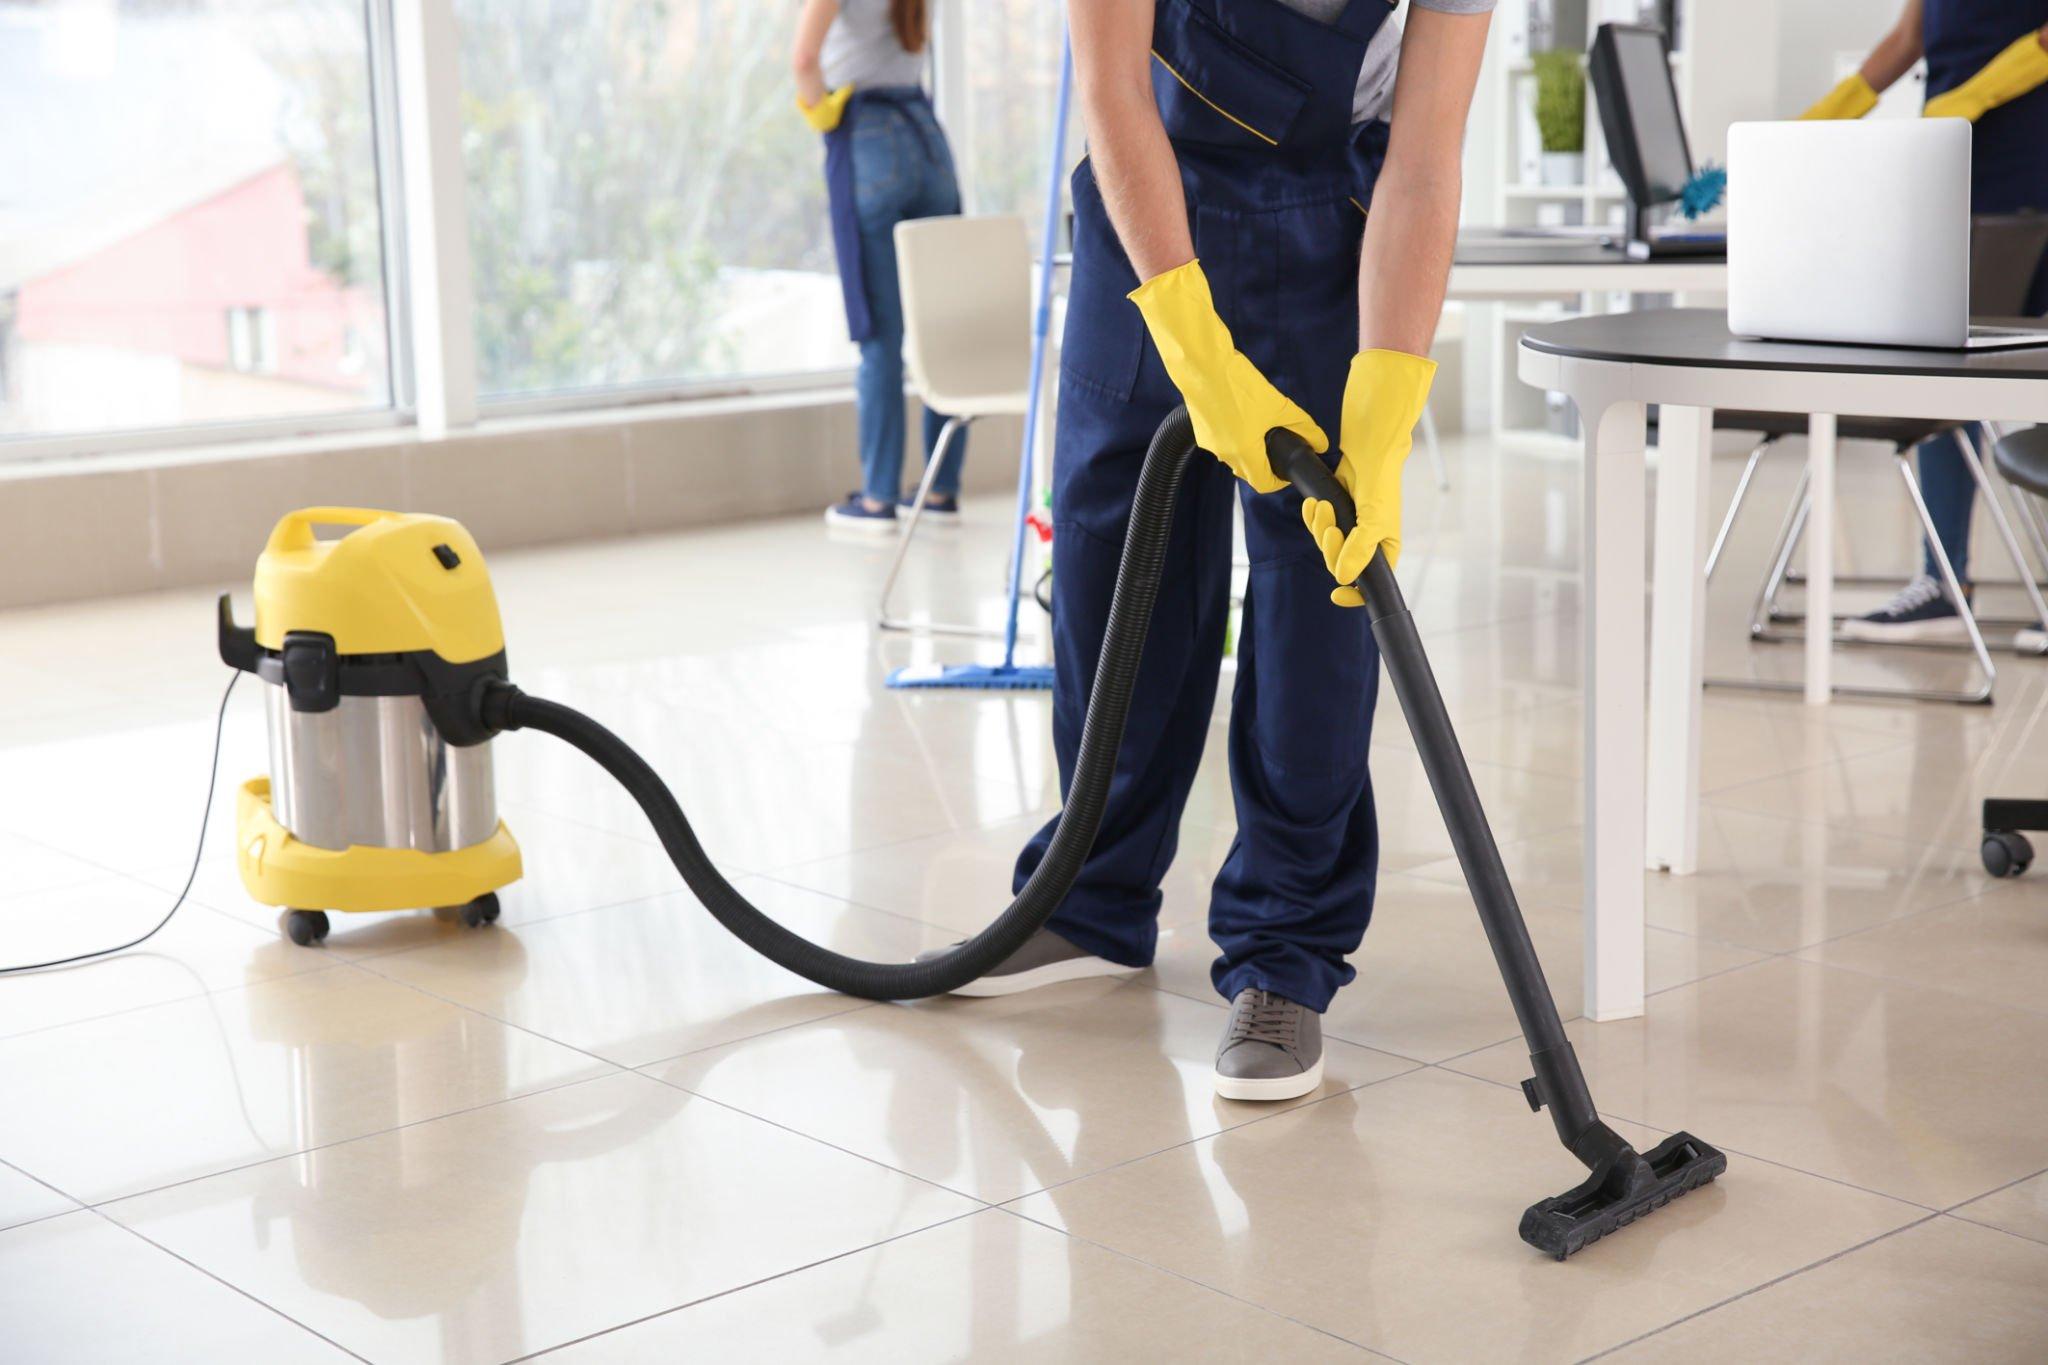 Professional Cleaning Services Are Becoming Popular